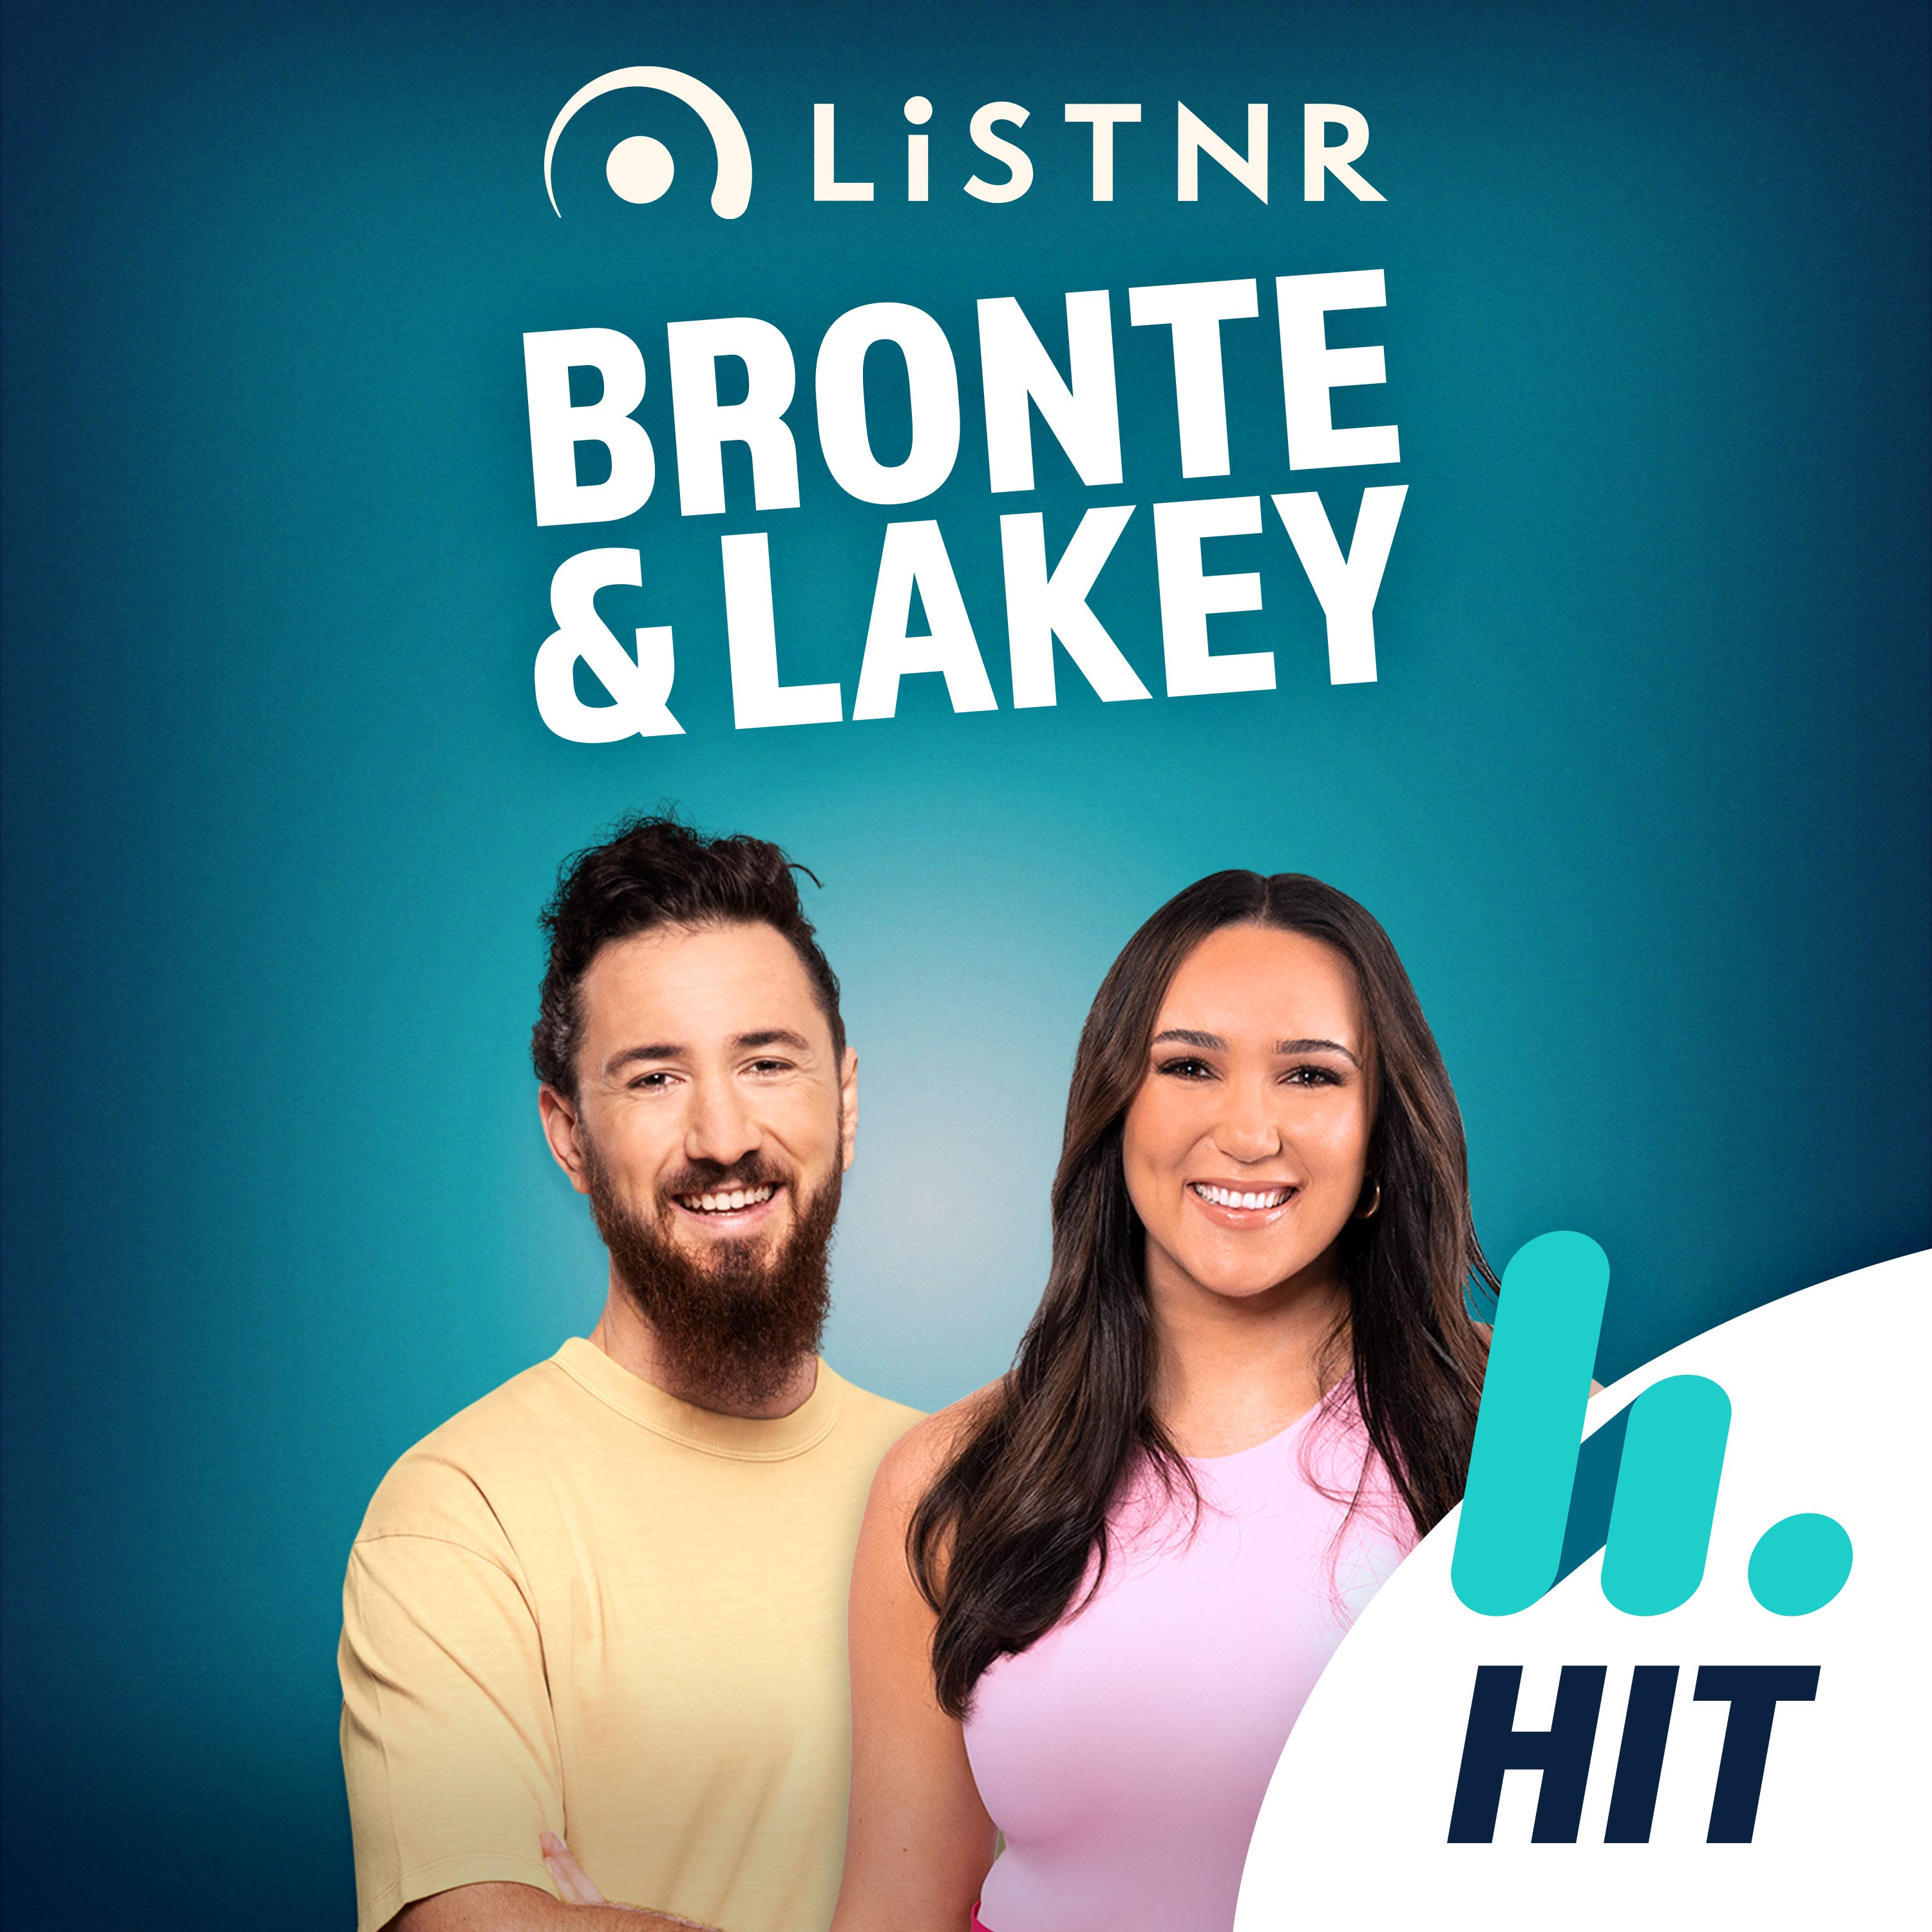 BRONTE AND LAKEY'S SHOW LAUNCH!